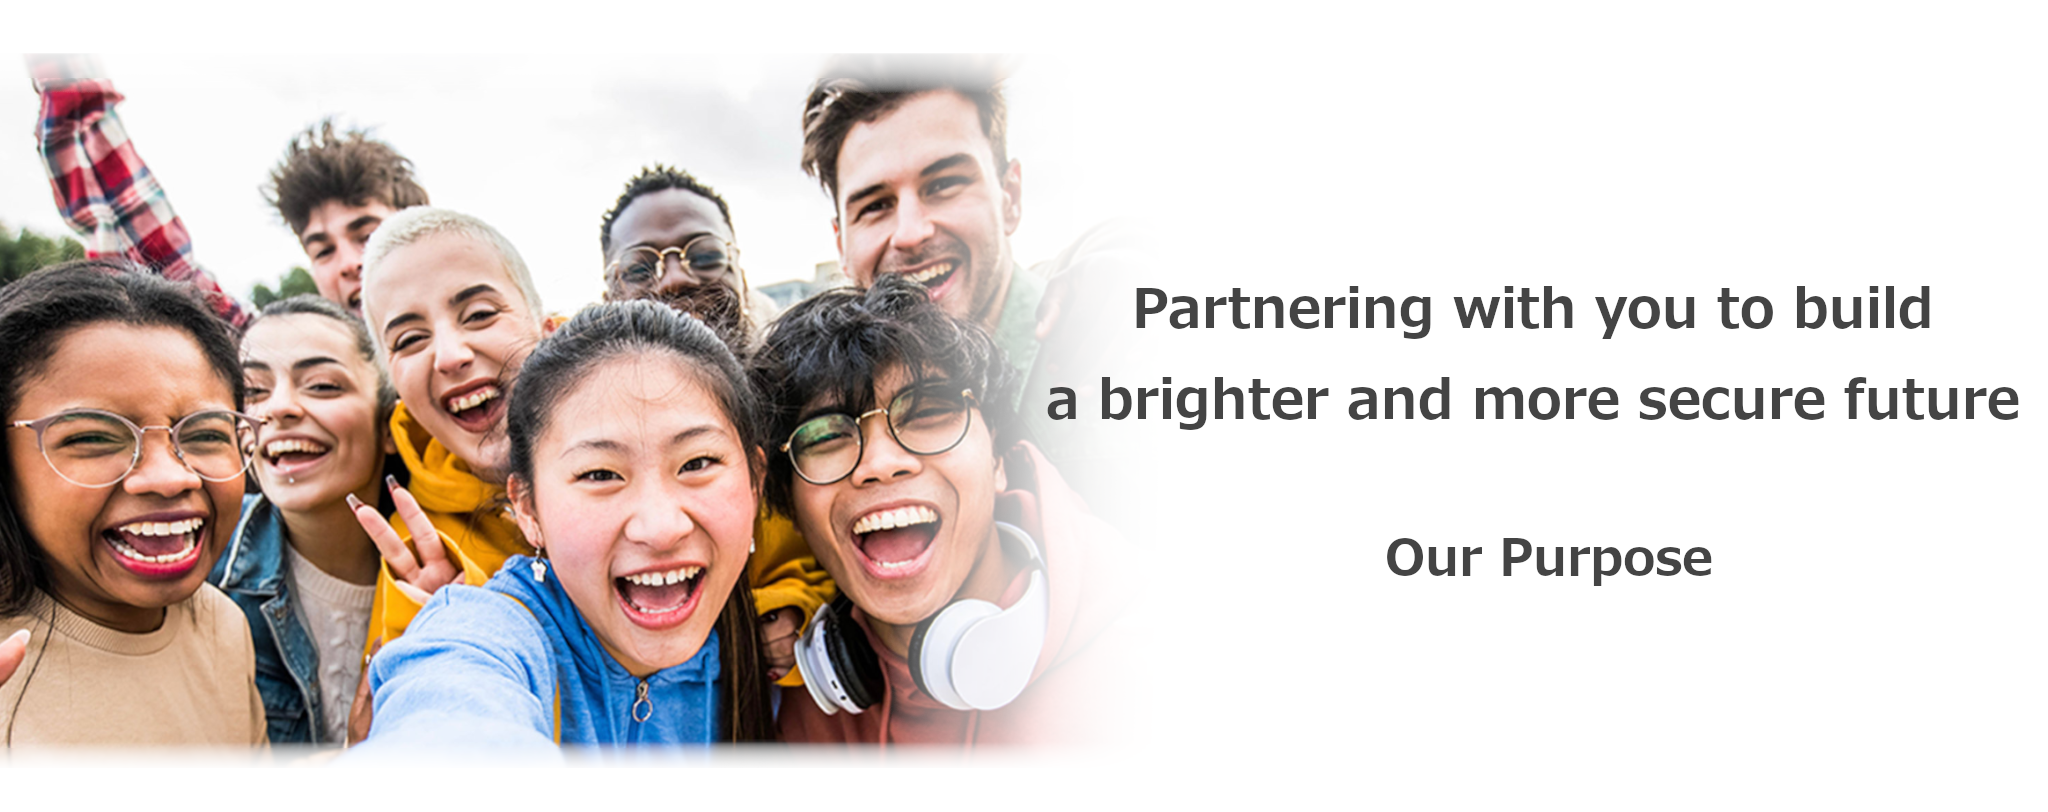 Partnering with you to build a brighter and more secure future